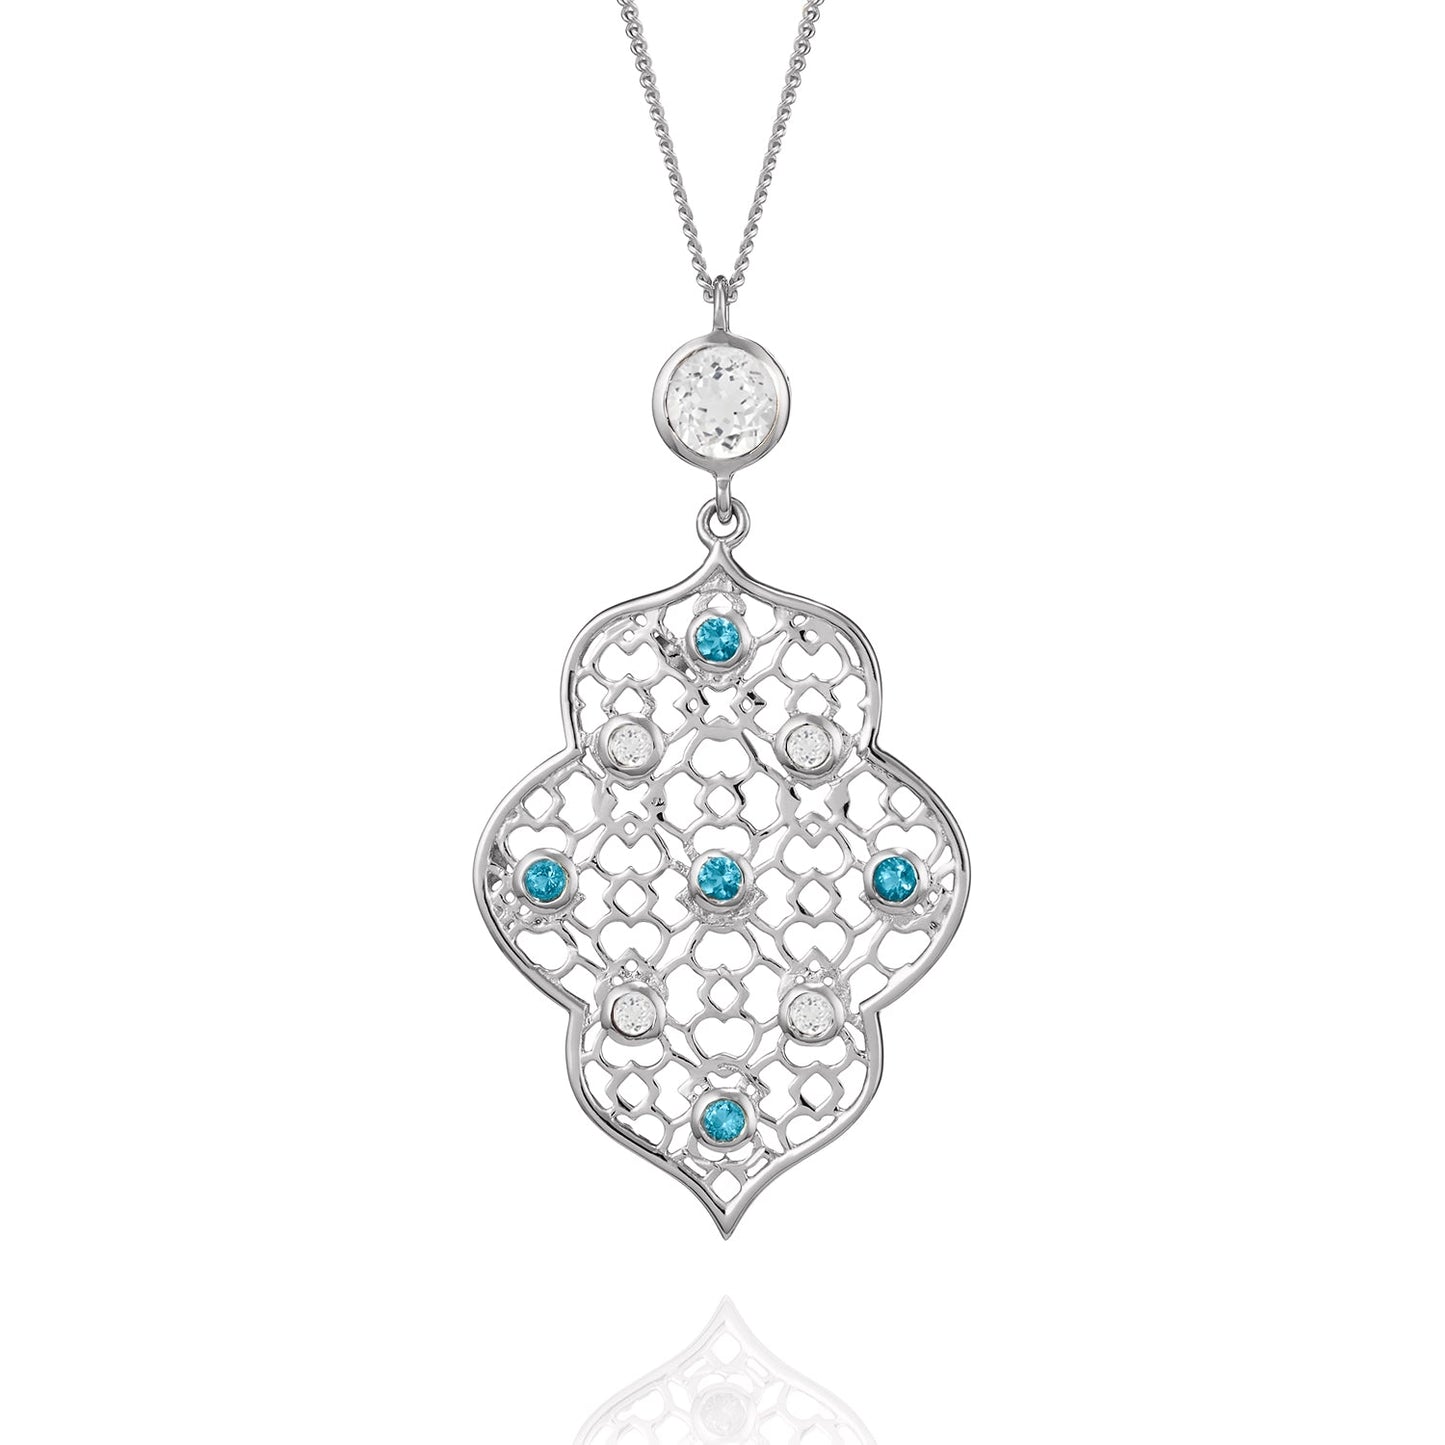 Load image into Gallery viewer, London-made luxury custom gold gemstone jewellery - Silver Filigree Pendant Necklace in White Topaz and Blue Topaz – Andalusian Collection, Augustine Jewellery, British Jewellers, Gemstone Jewellery, Luxury Jewellery London.
